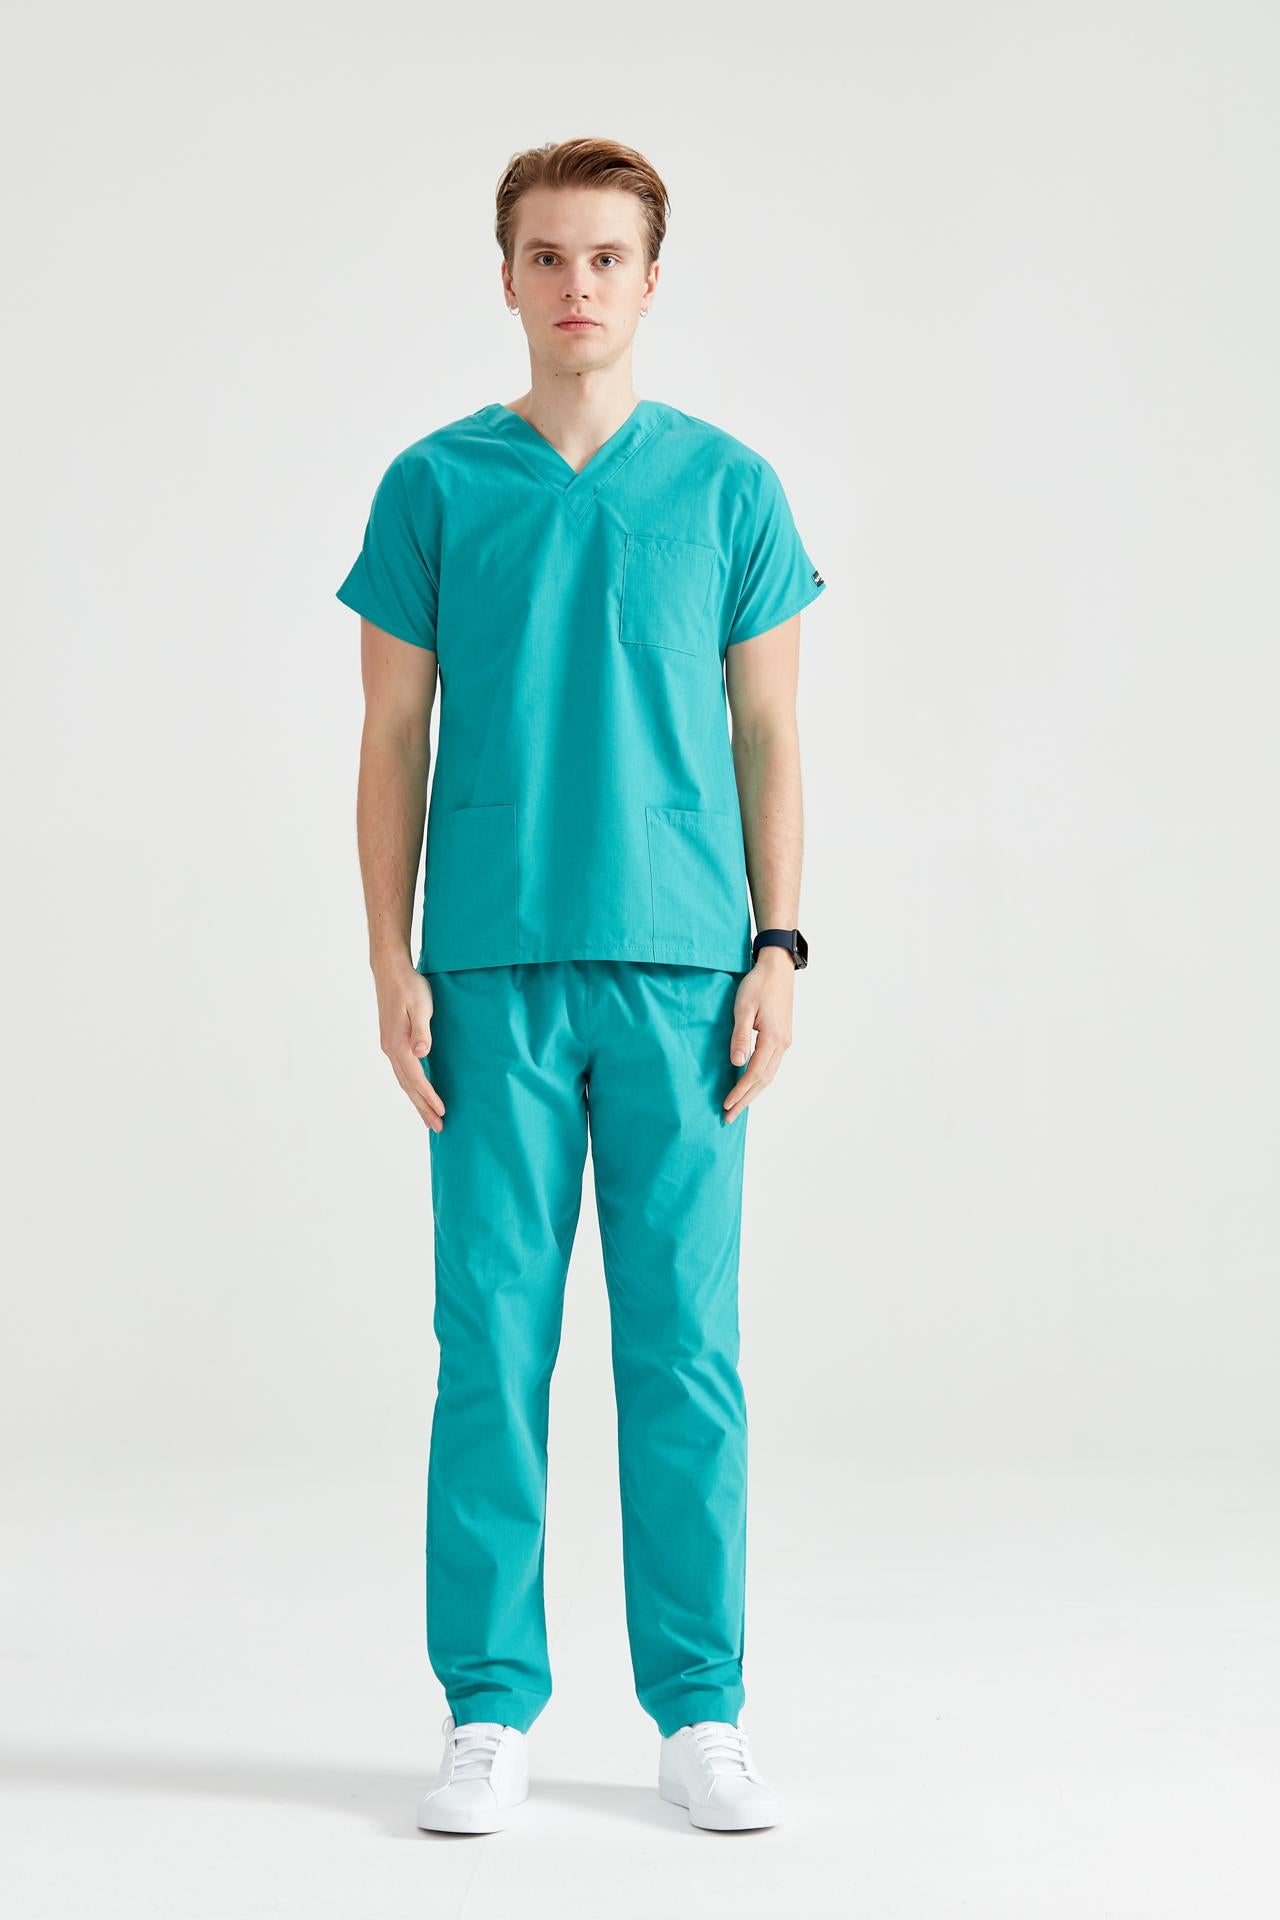 Surgical Green Medical Suit, Men - Surgical - Classic Model